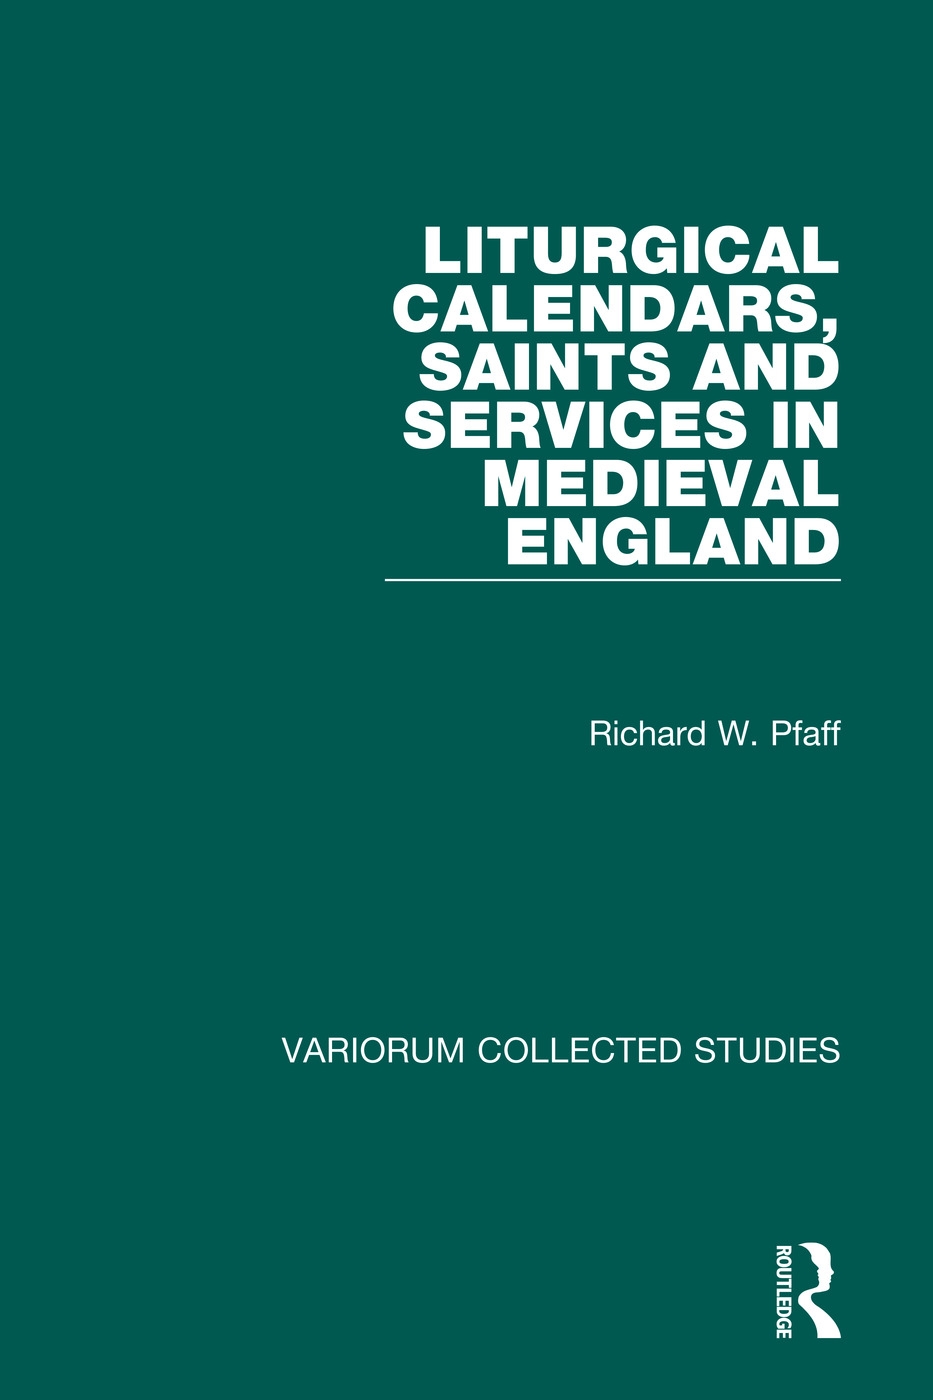 Liturgical Calendars, Saints, and Services in Medieval England